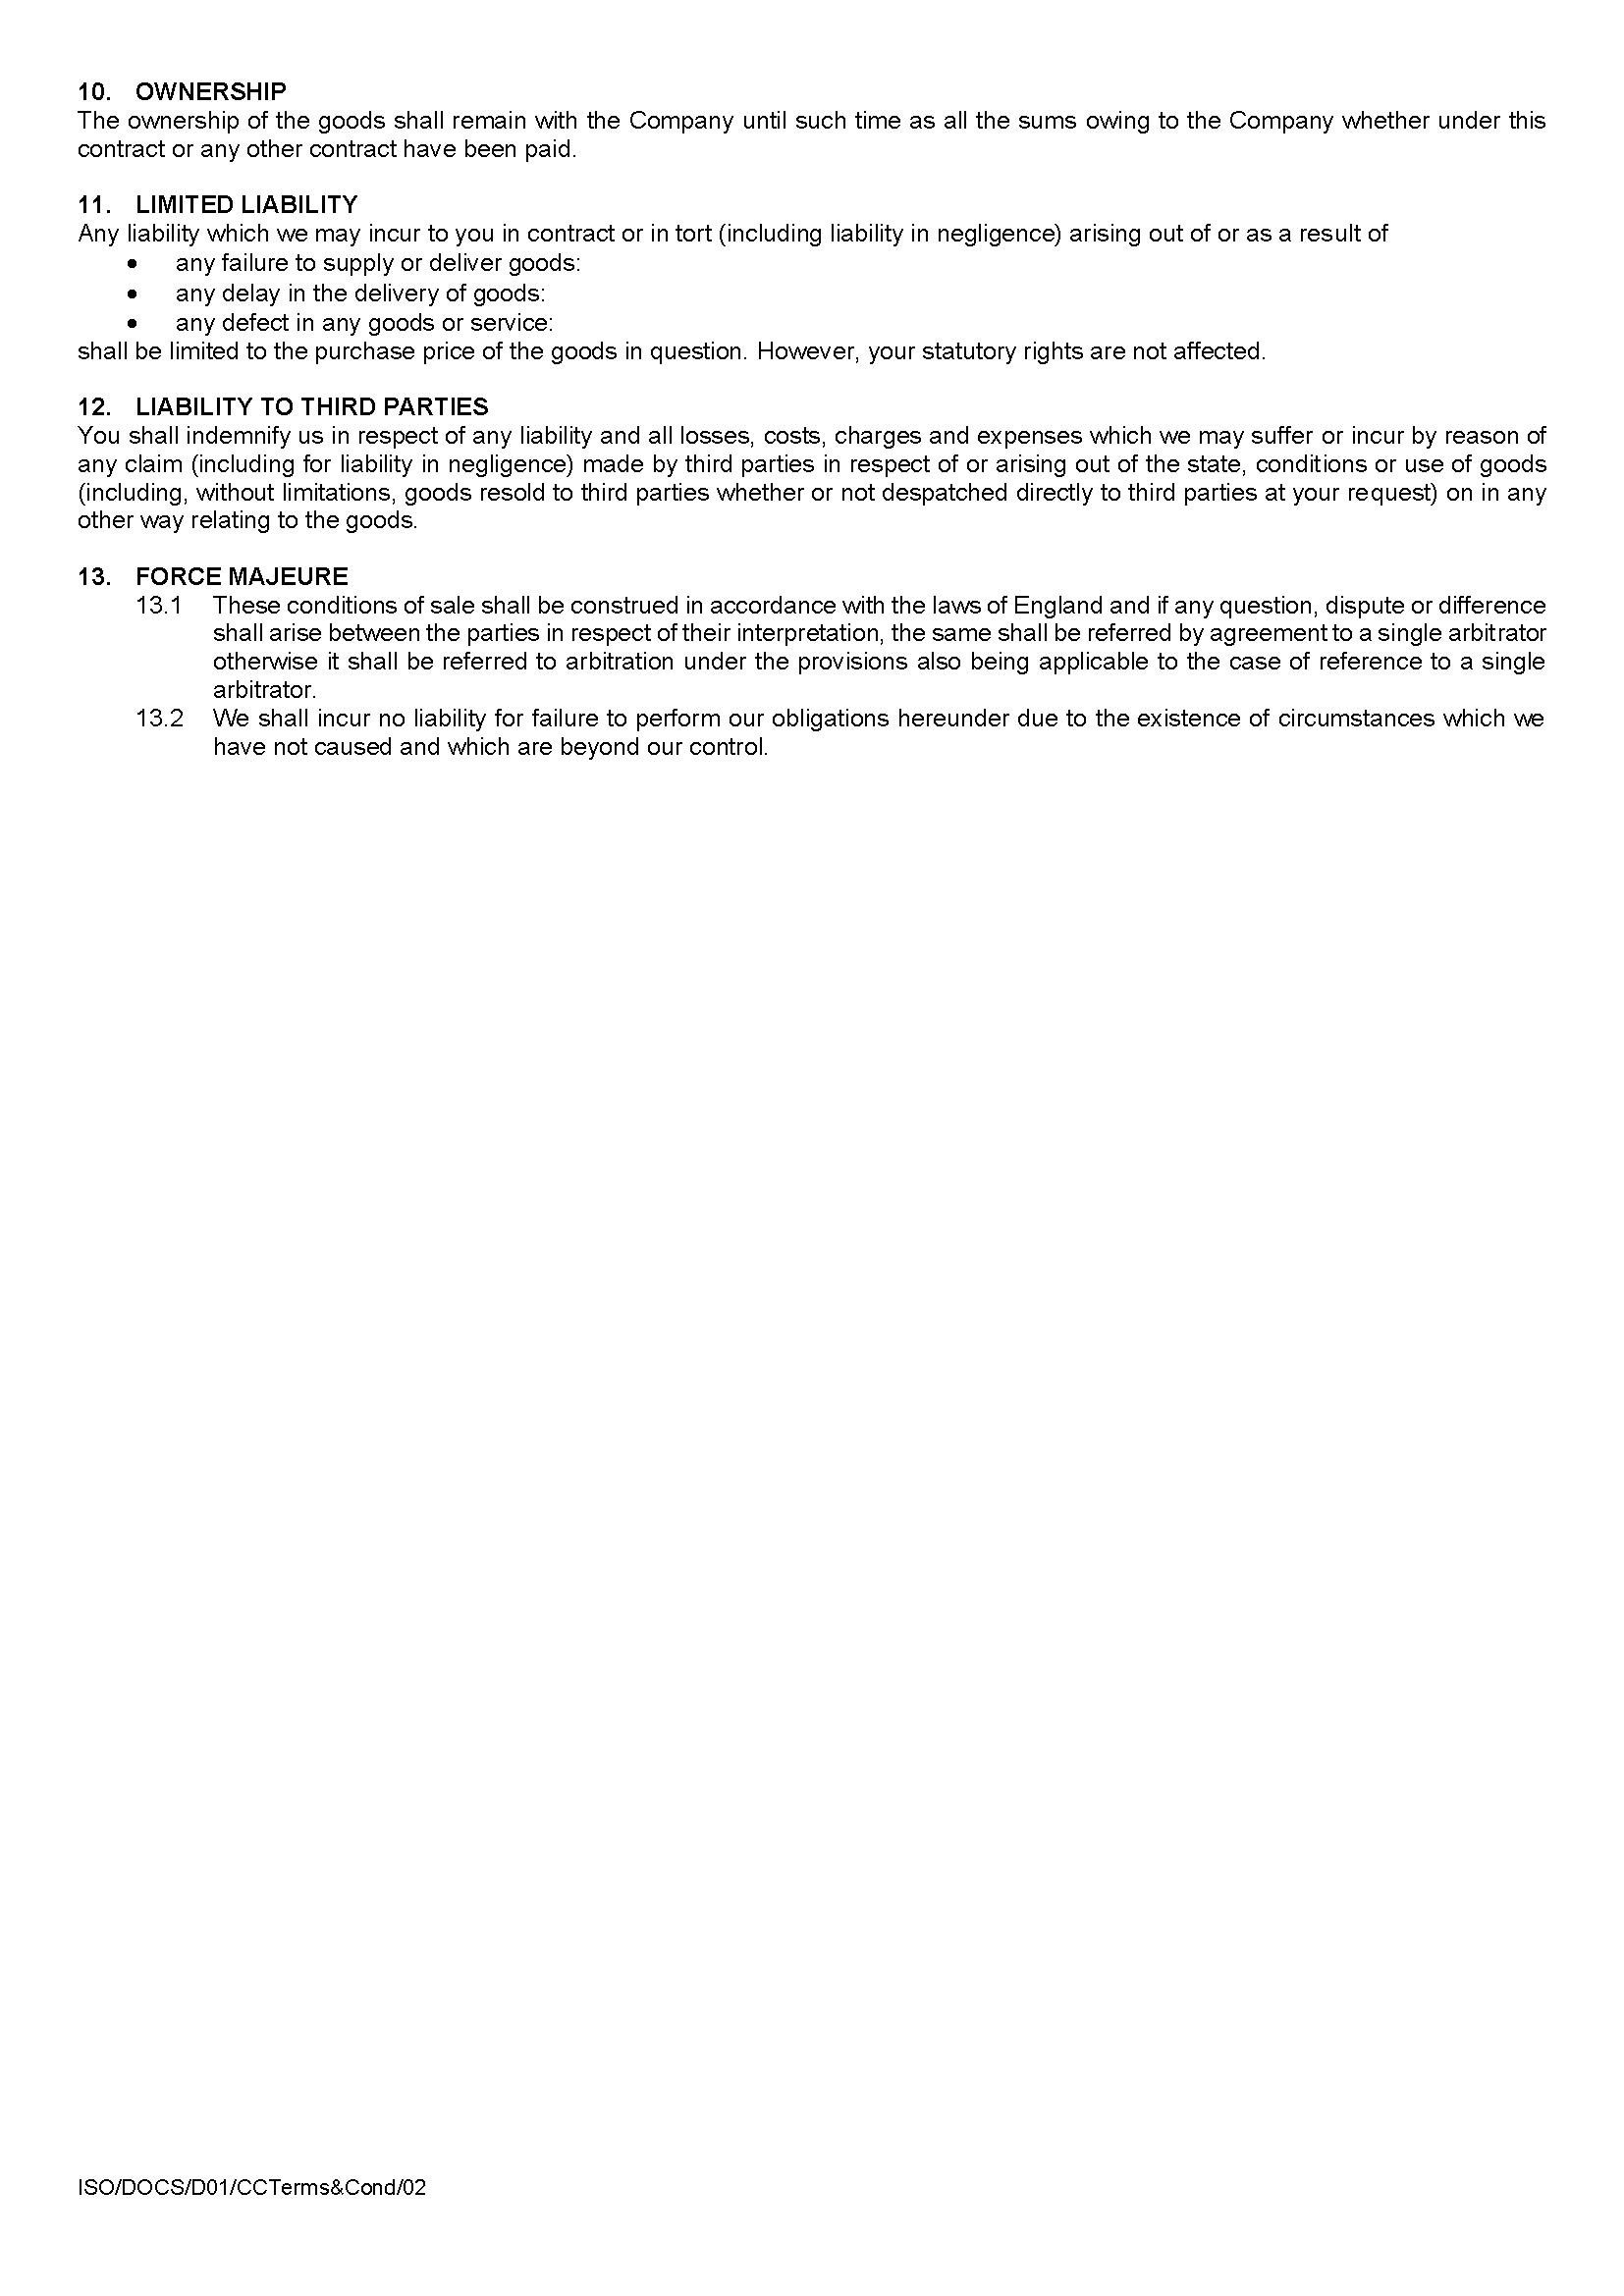 Concept Cables Terms & Conditions of Sale (Page2)